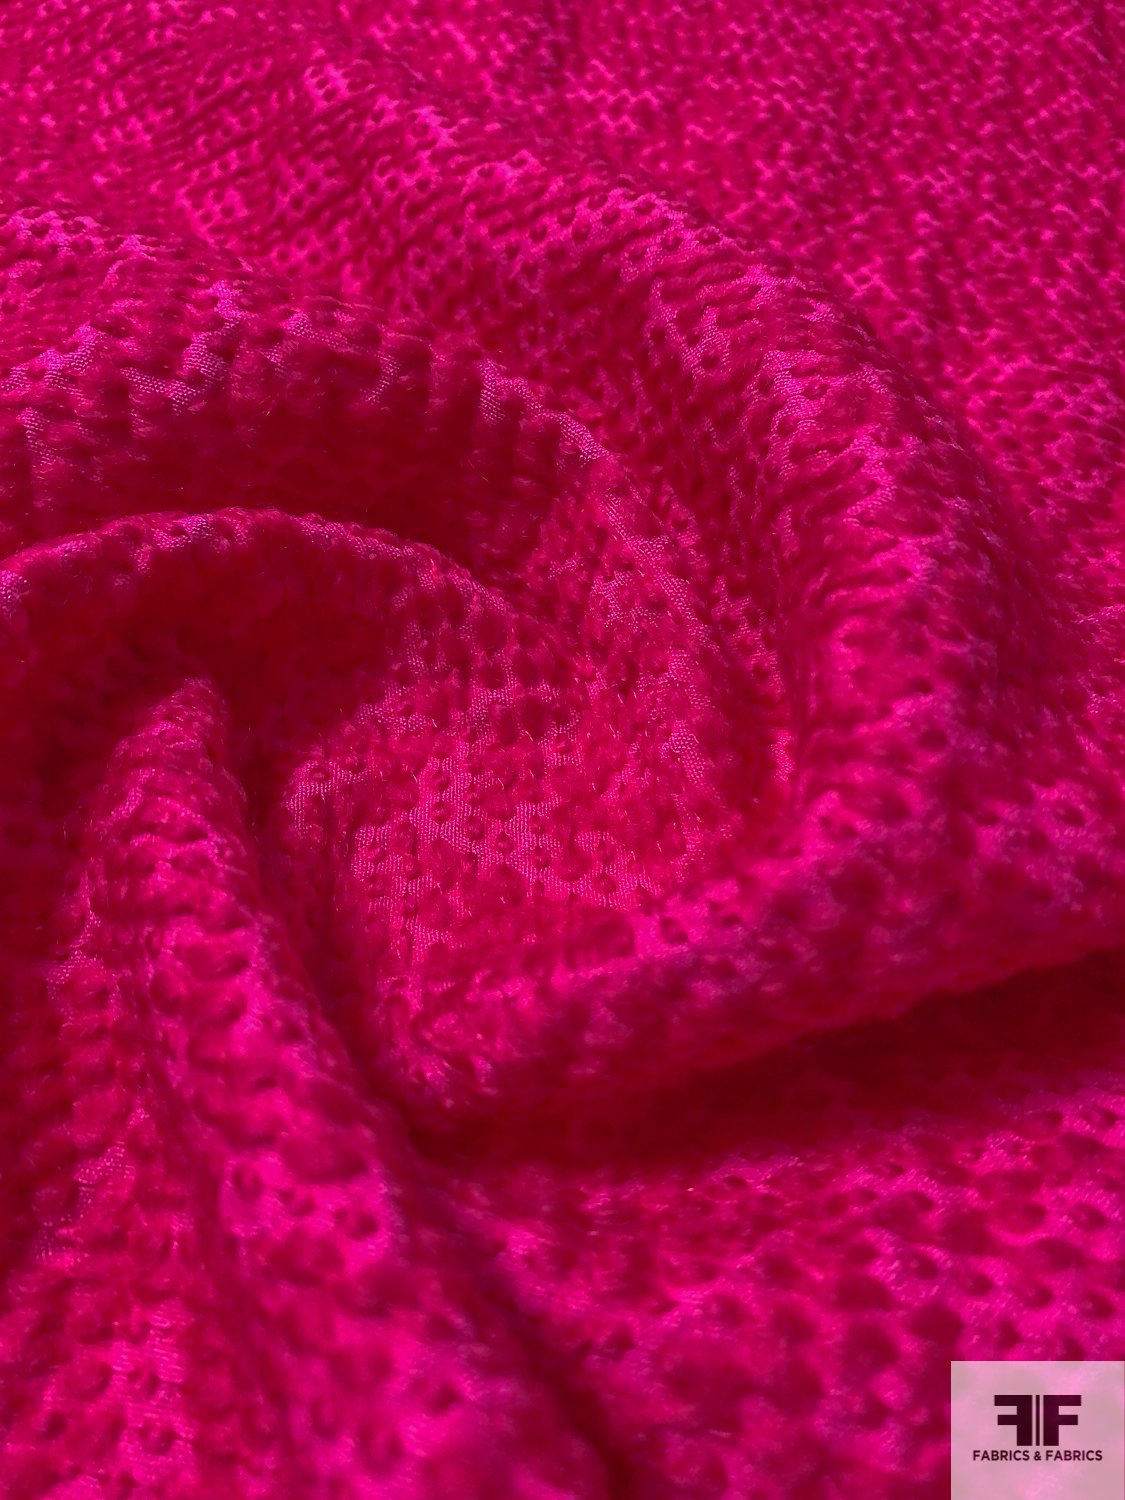 Italian Novelty Weave Boucle-Look Wool Blend Suiting - Hot Magenta Pink